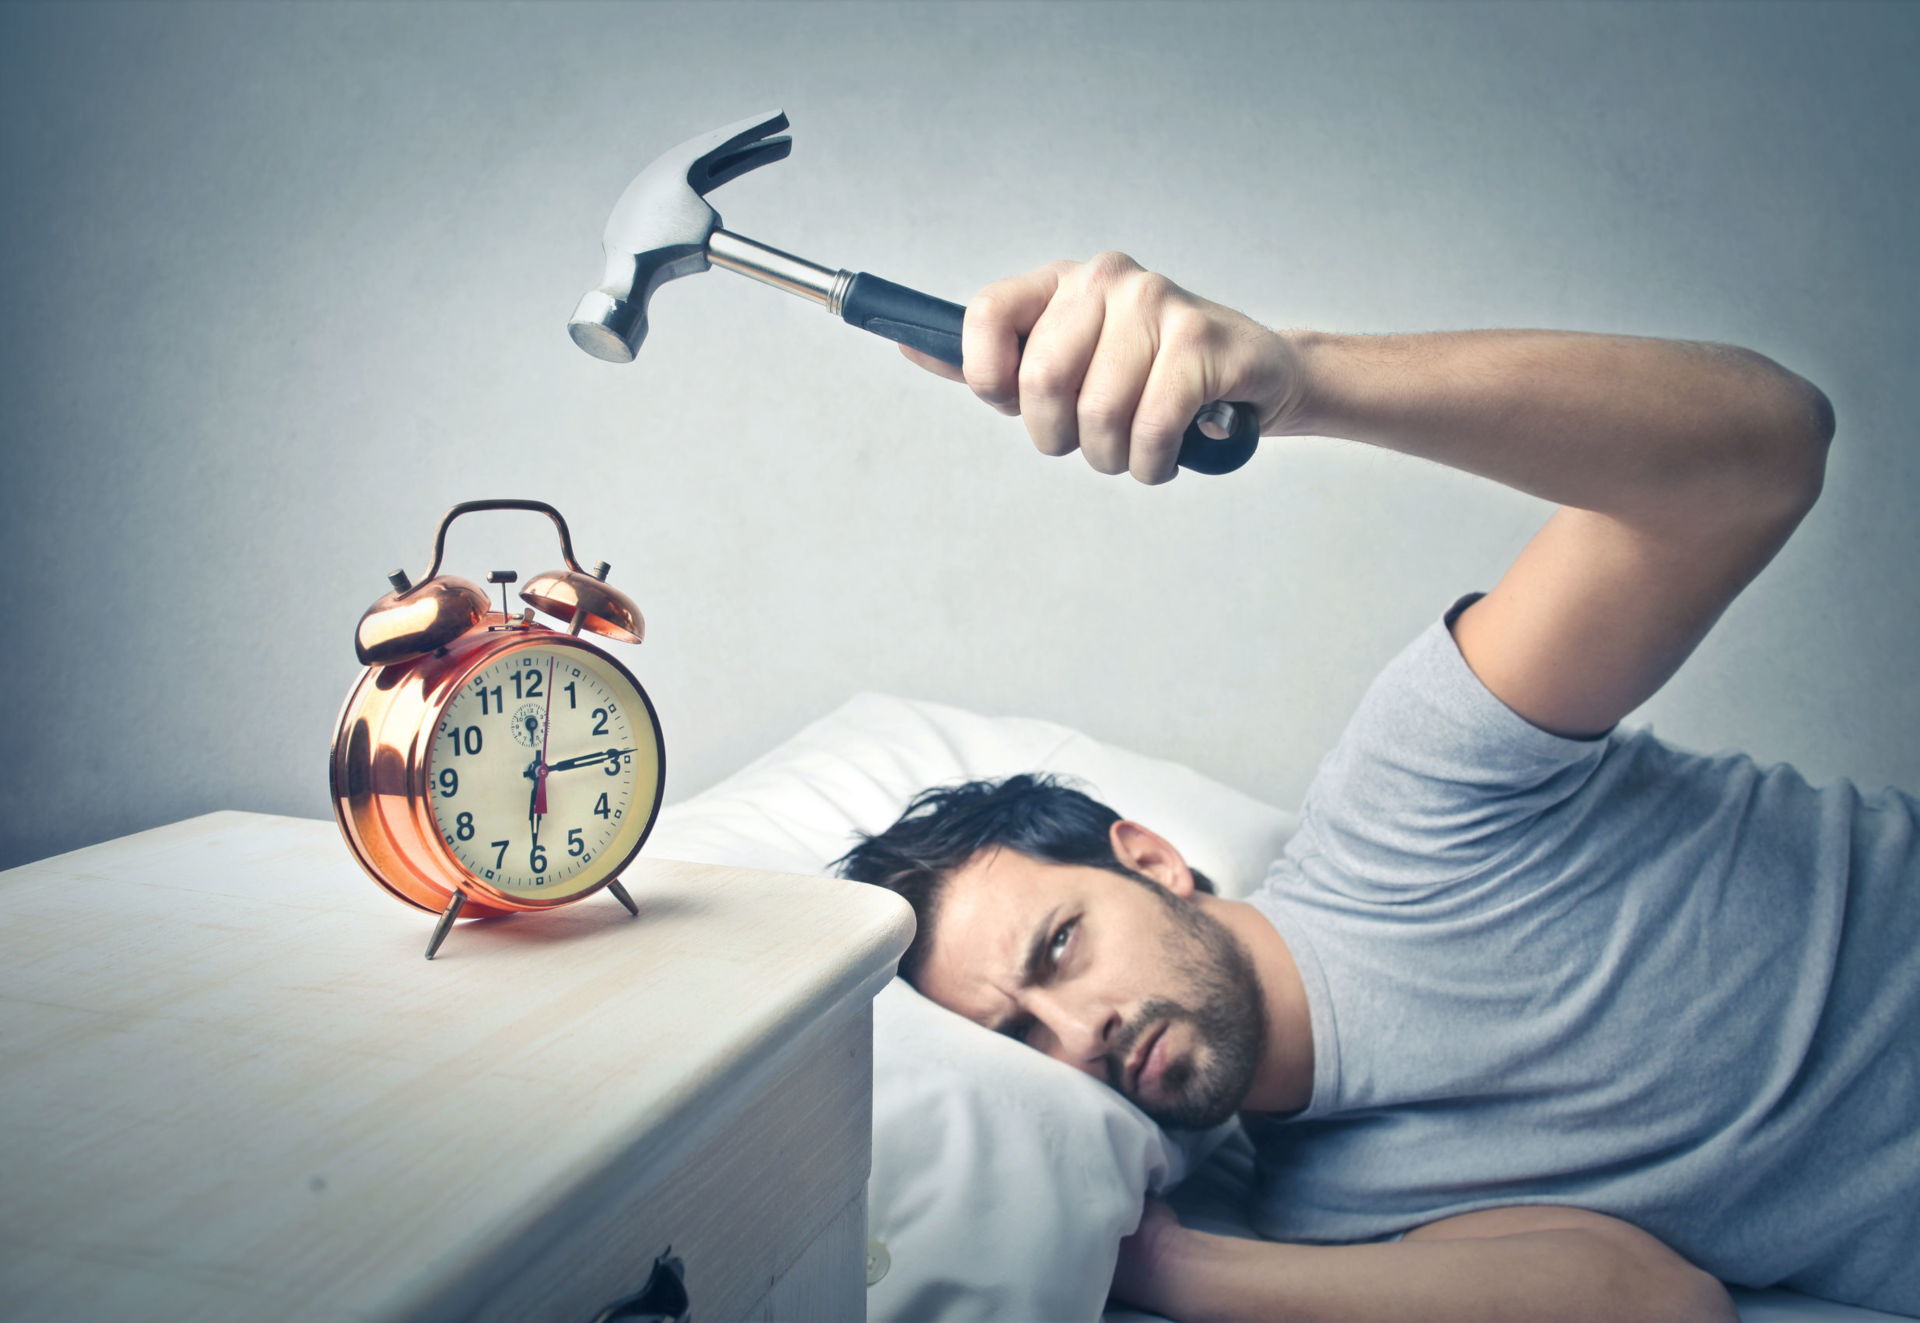 Man Hitting Alarm Clock With A Hammer As He Tries To Sleep